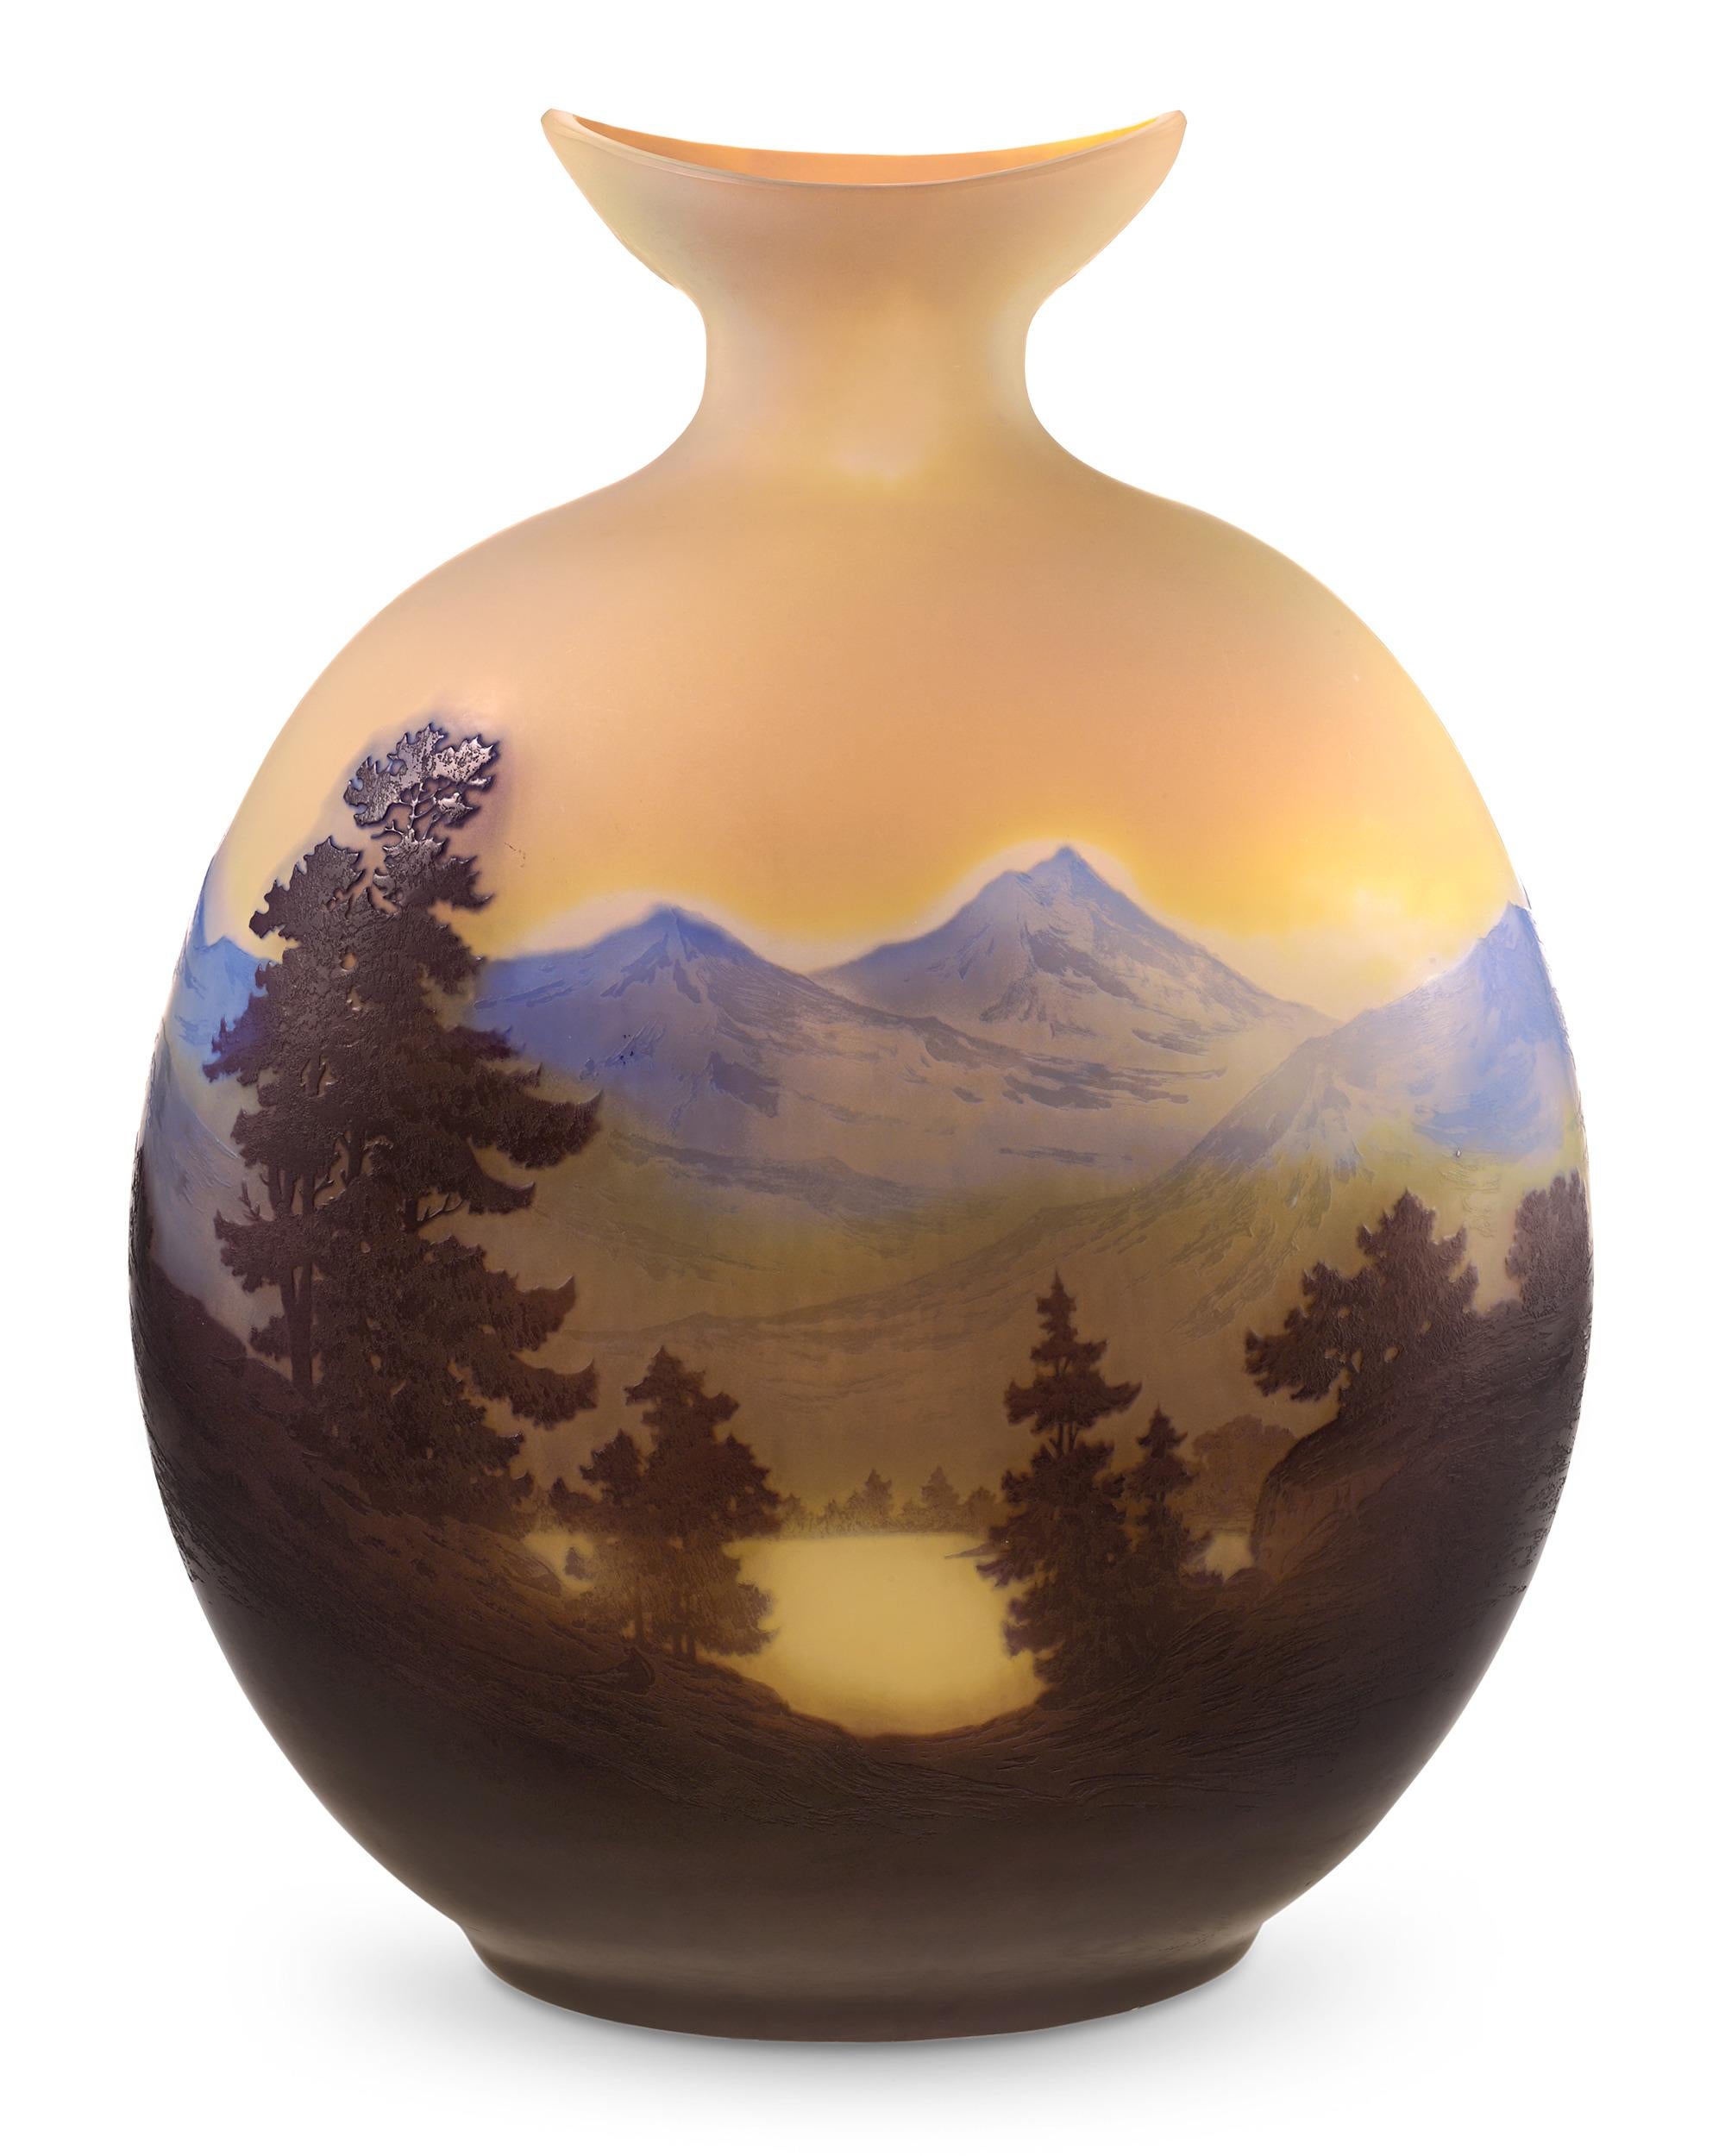 Exceptional in both size and artistry, this sand-polished cameo art glass vase from the famed Art Nouveau master Émile Gallé features an exceedingly rare alpine scene. The artist's love of nature is evident in the detailed rendition of mountains